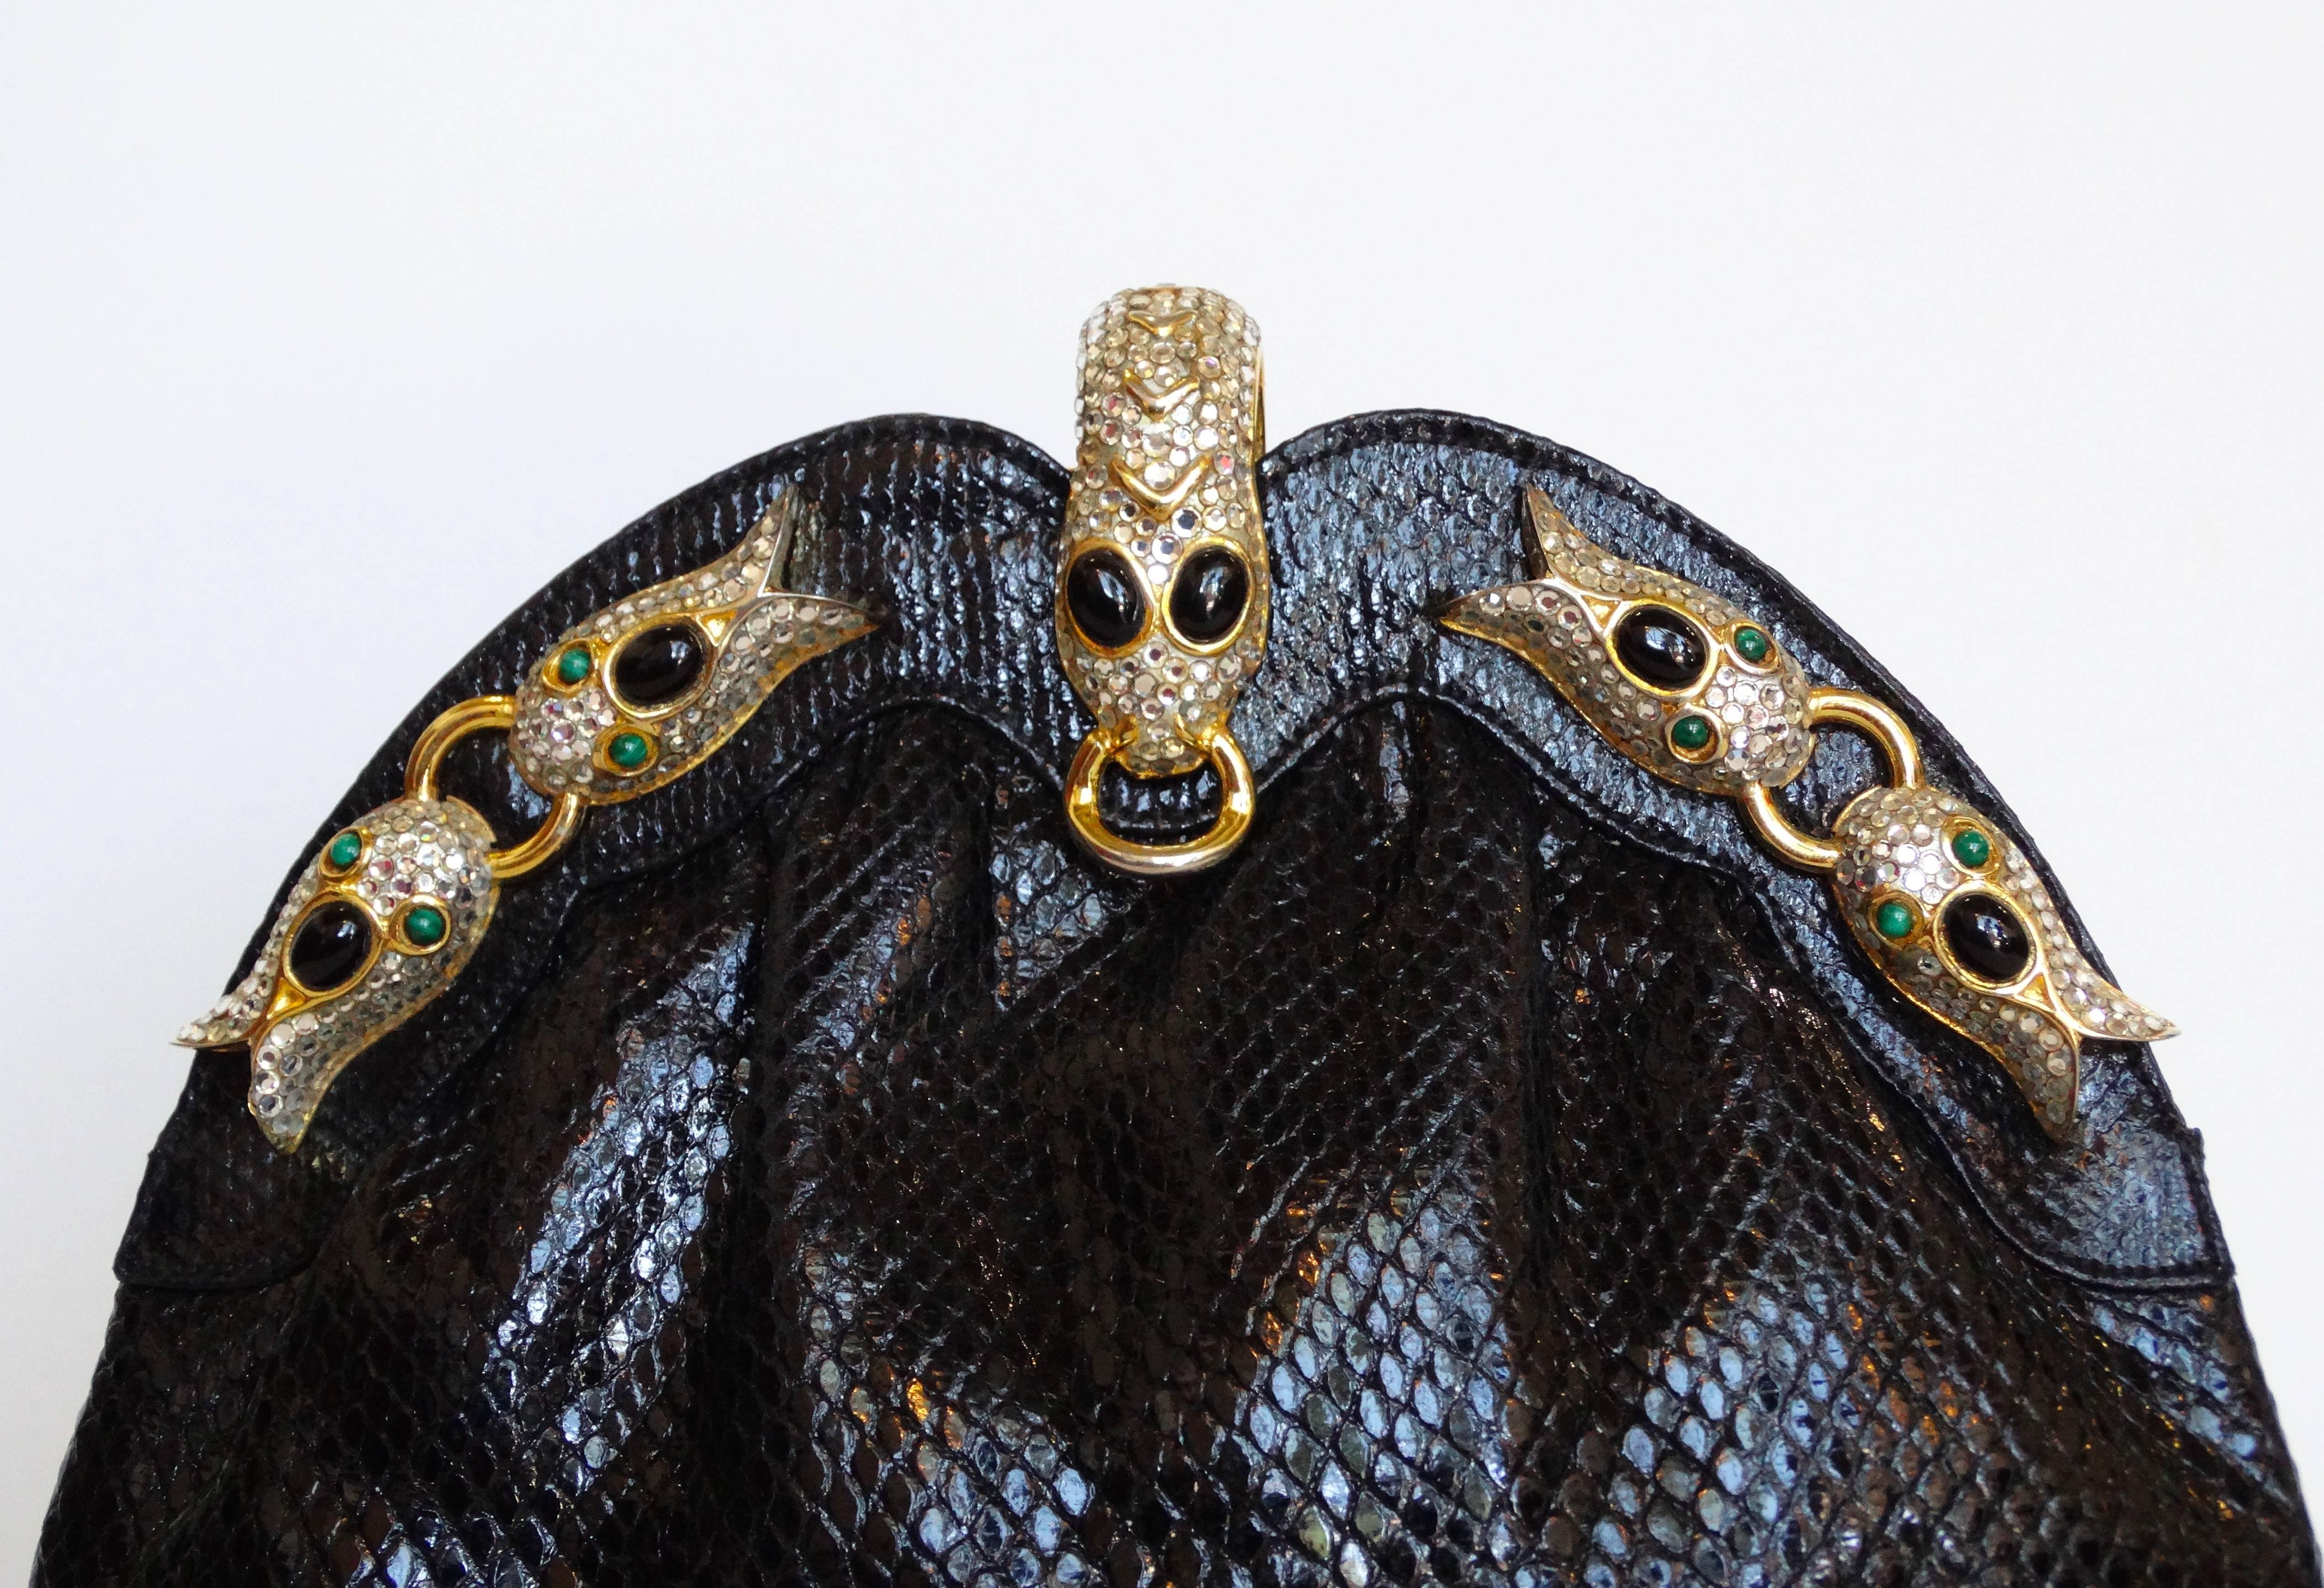 Beautiful 1980s evening bag from French designer Finesse La Model. Black snakeskin accented with gold snake hardware and crystal and enamel details. Converts to a cross-body bag with delicate gold strap which comfortably tucks into the interior.